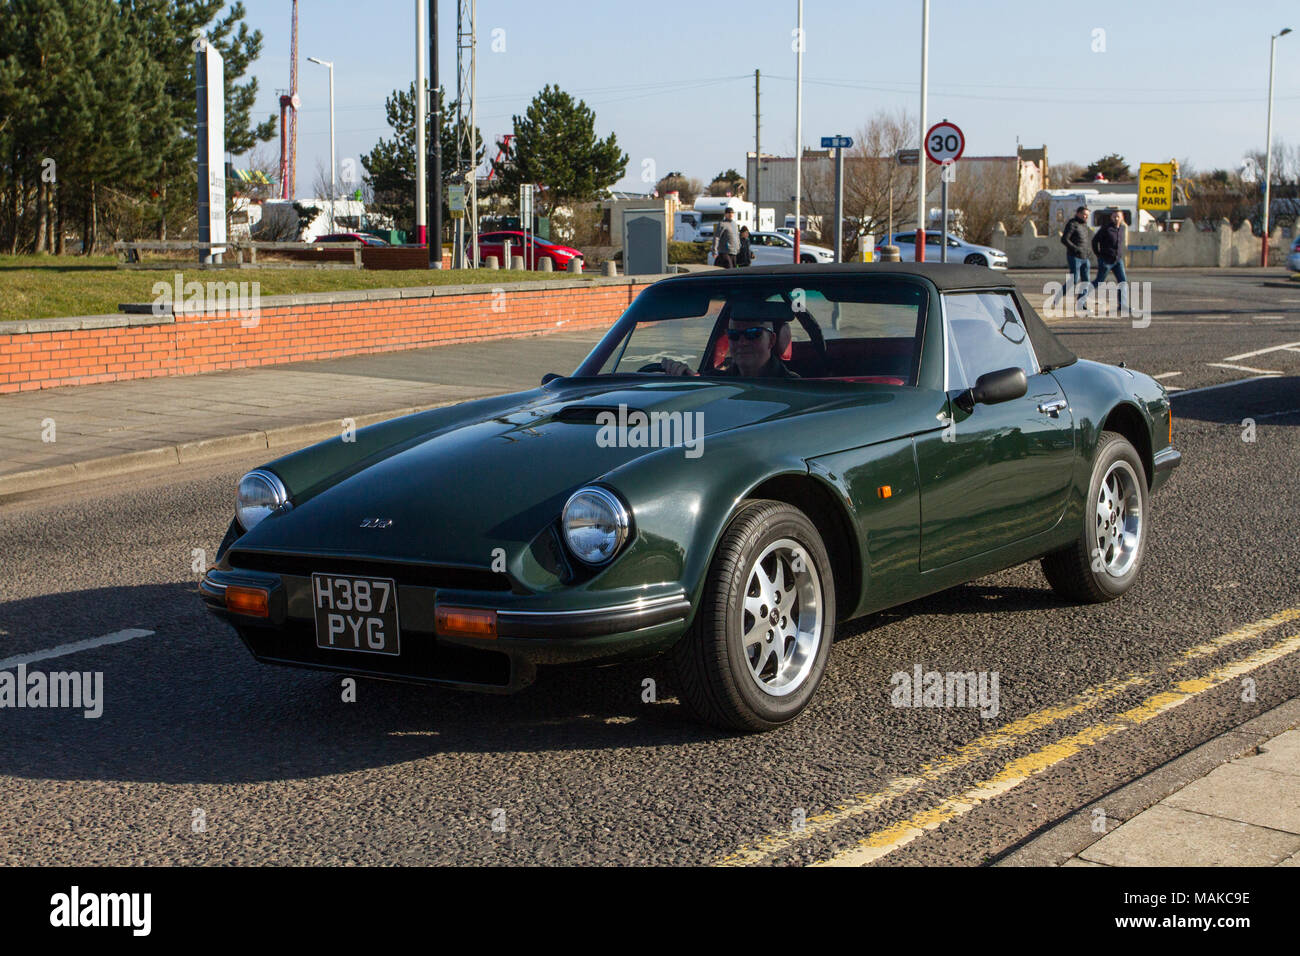 Green 1990 Tvr 290 S3 at the North-West Supercar event as cars and tourists arrive in the coastal resort. Cars are bumper to bumper on the seafront esplanade as classic & vintage car enthusiasts take advantage of warm weather for a motoring day out. Stock Photo